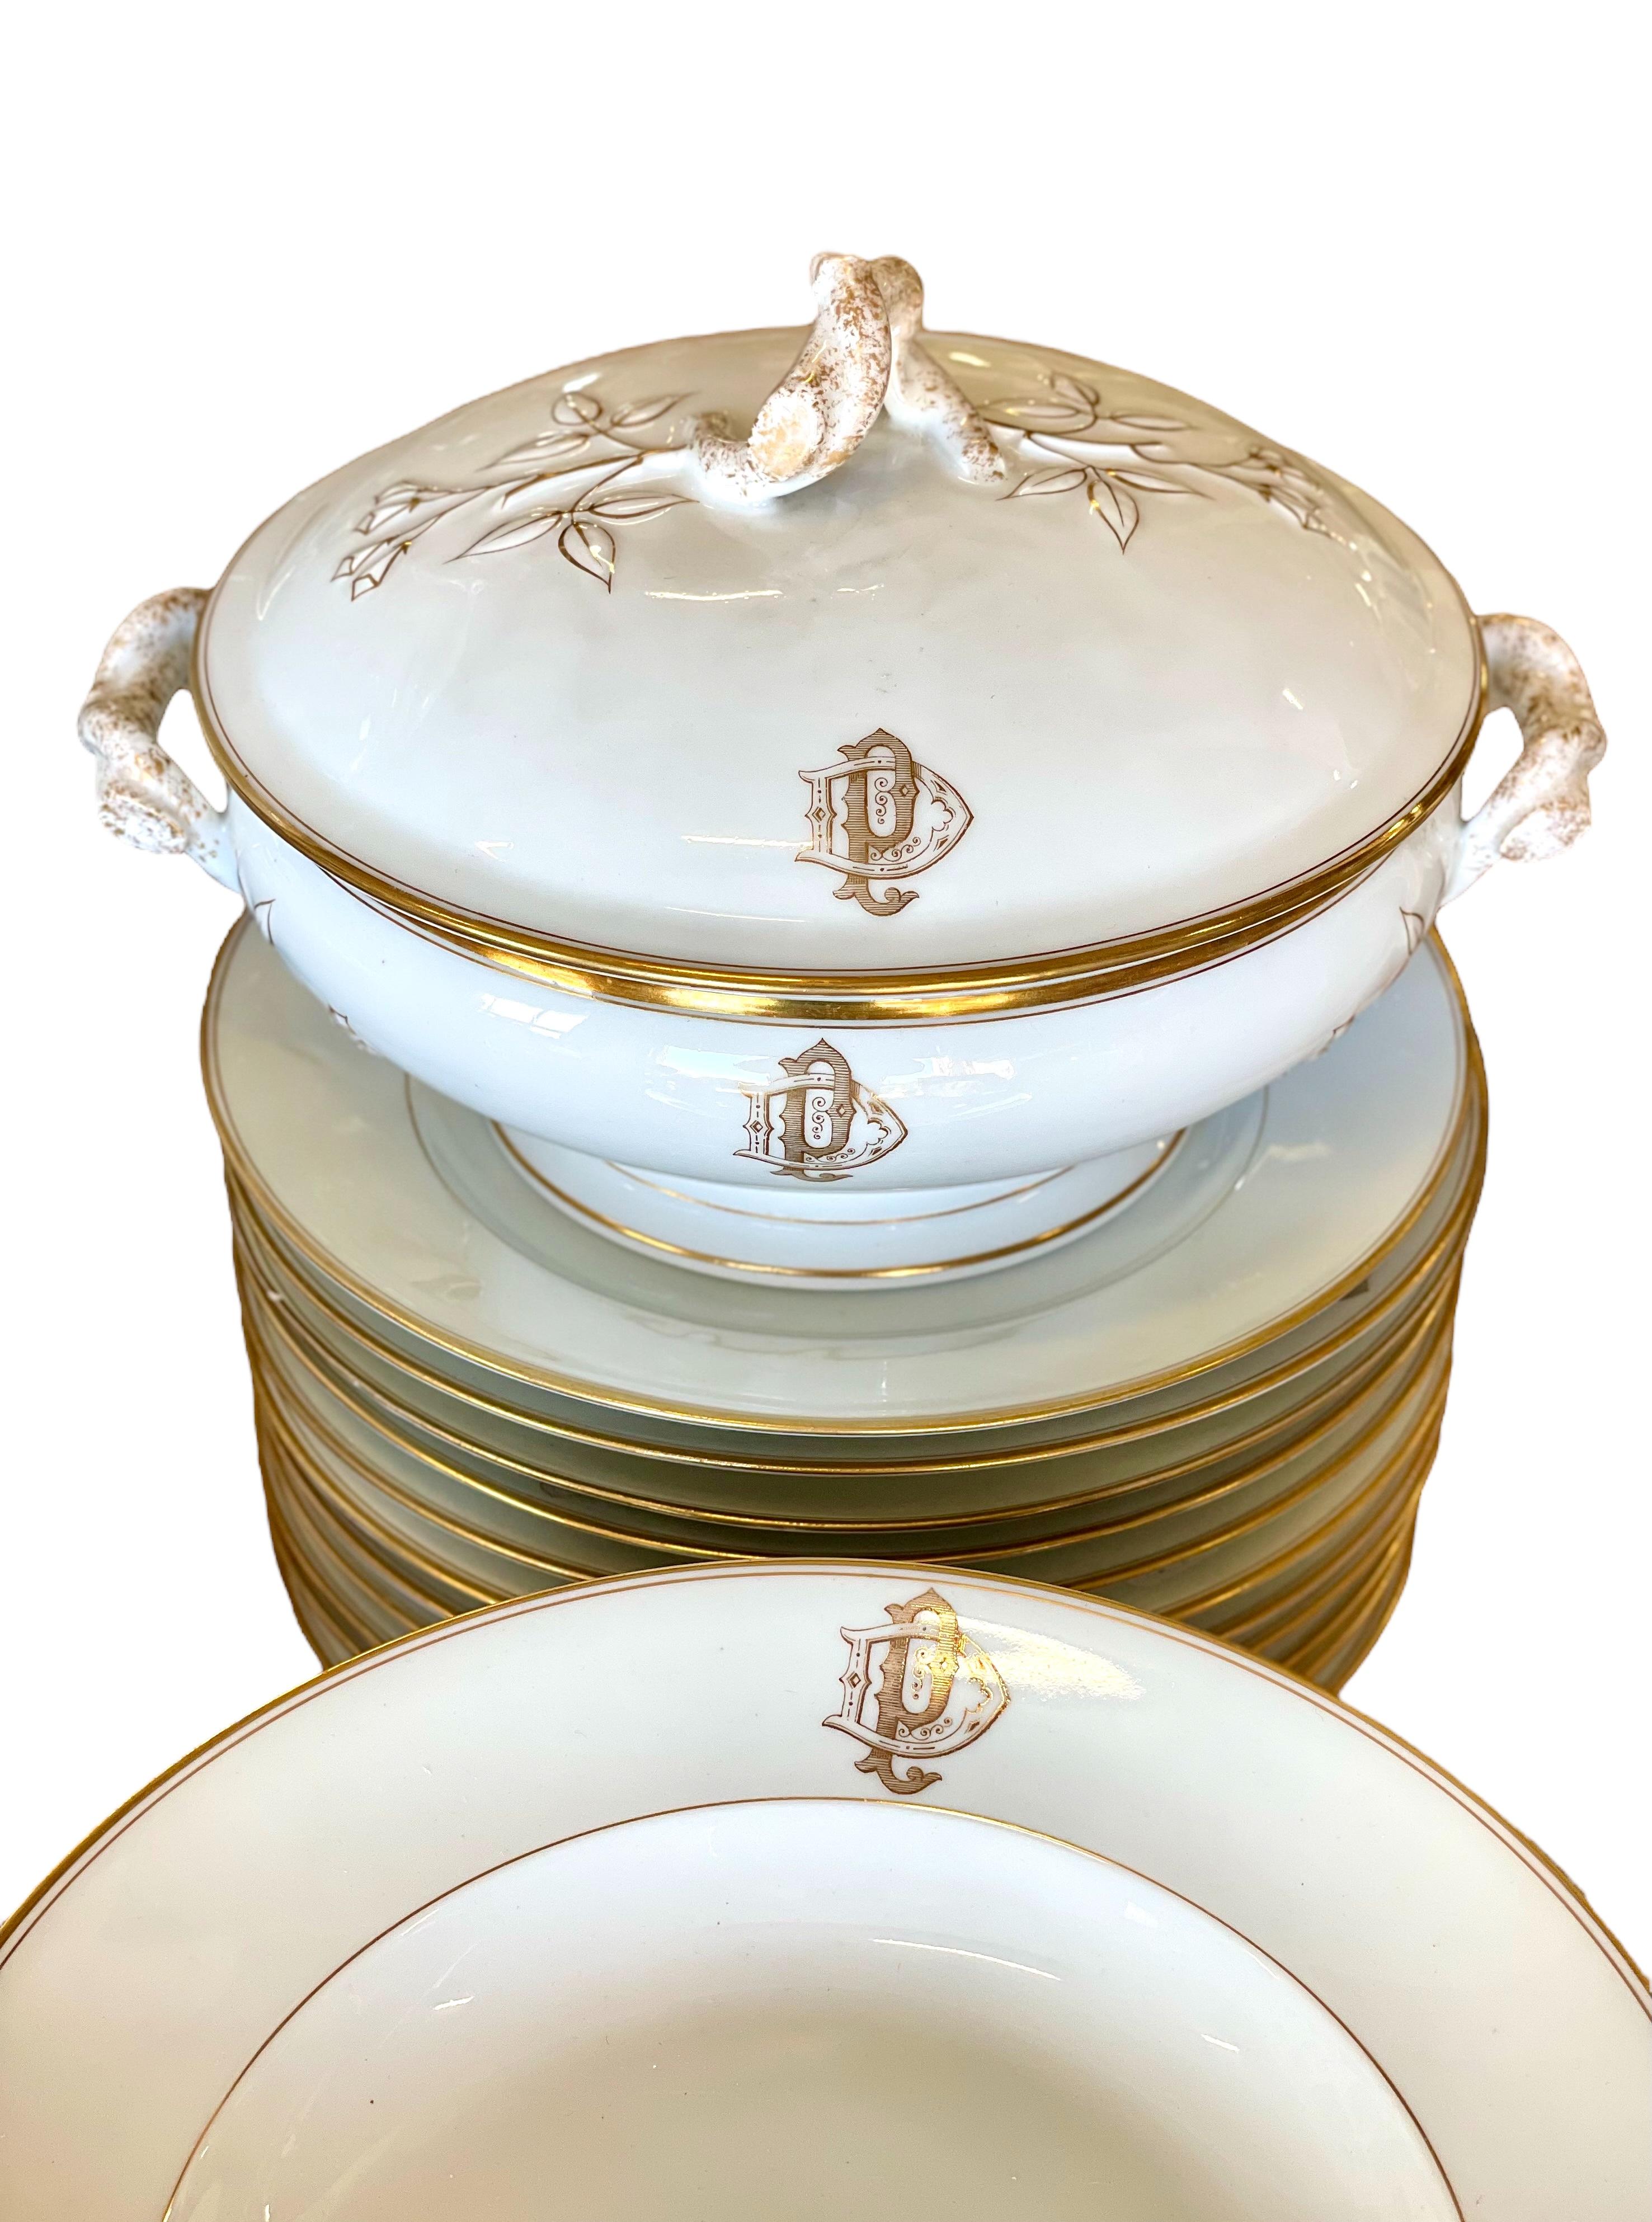 19th Century Limoges Porcelain Set of 50 Piece Dinner Service with Gilt Edges and Monogramme For Sale